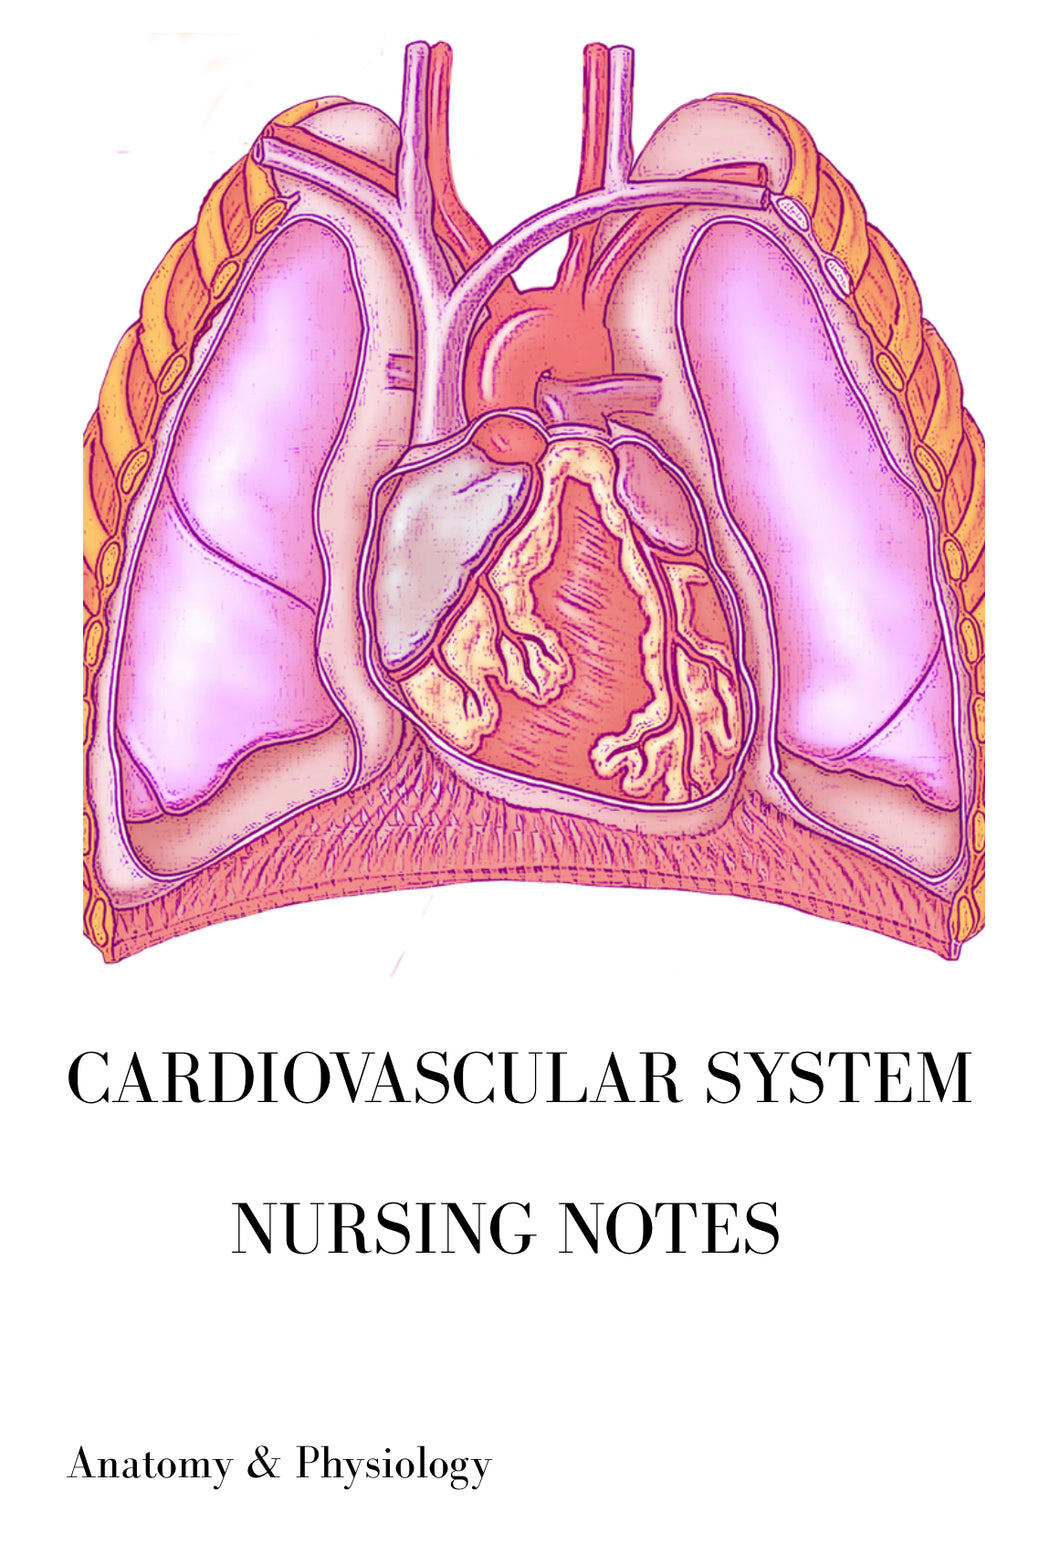 Cardiovascular System Nursing Notes -A&P (34 pages)